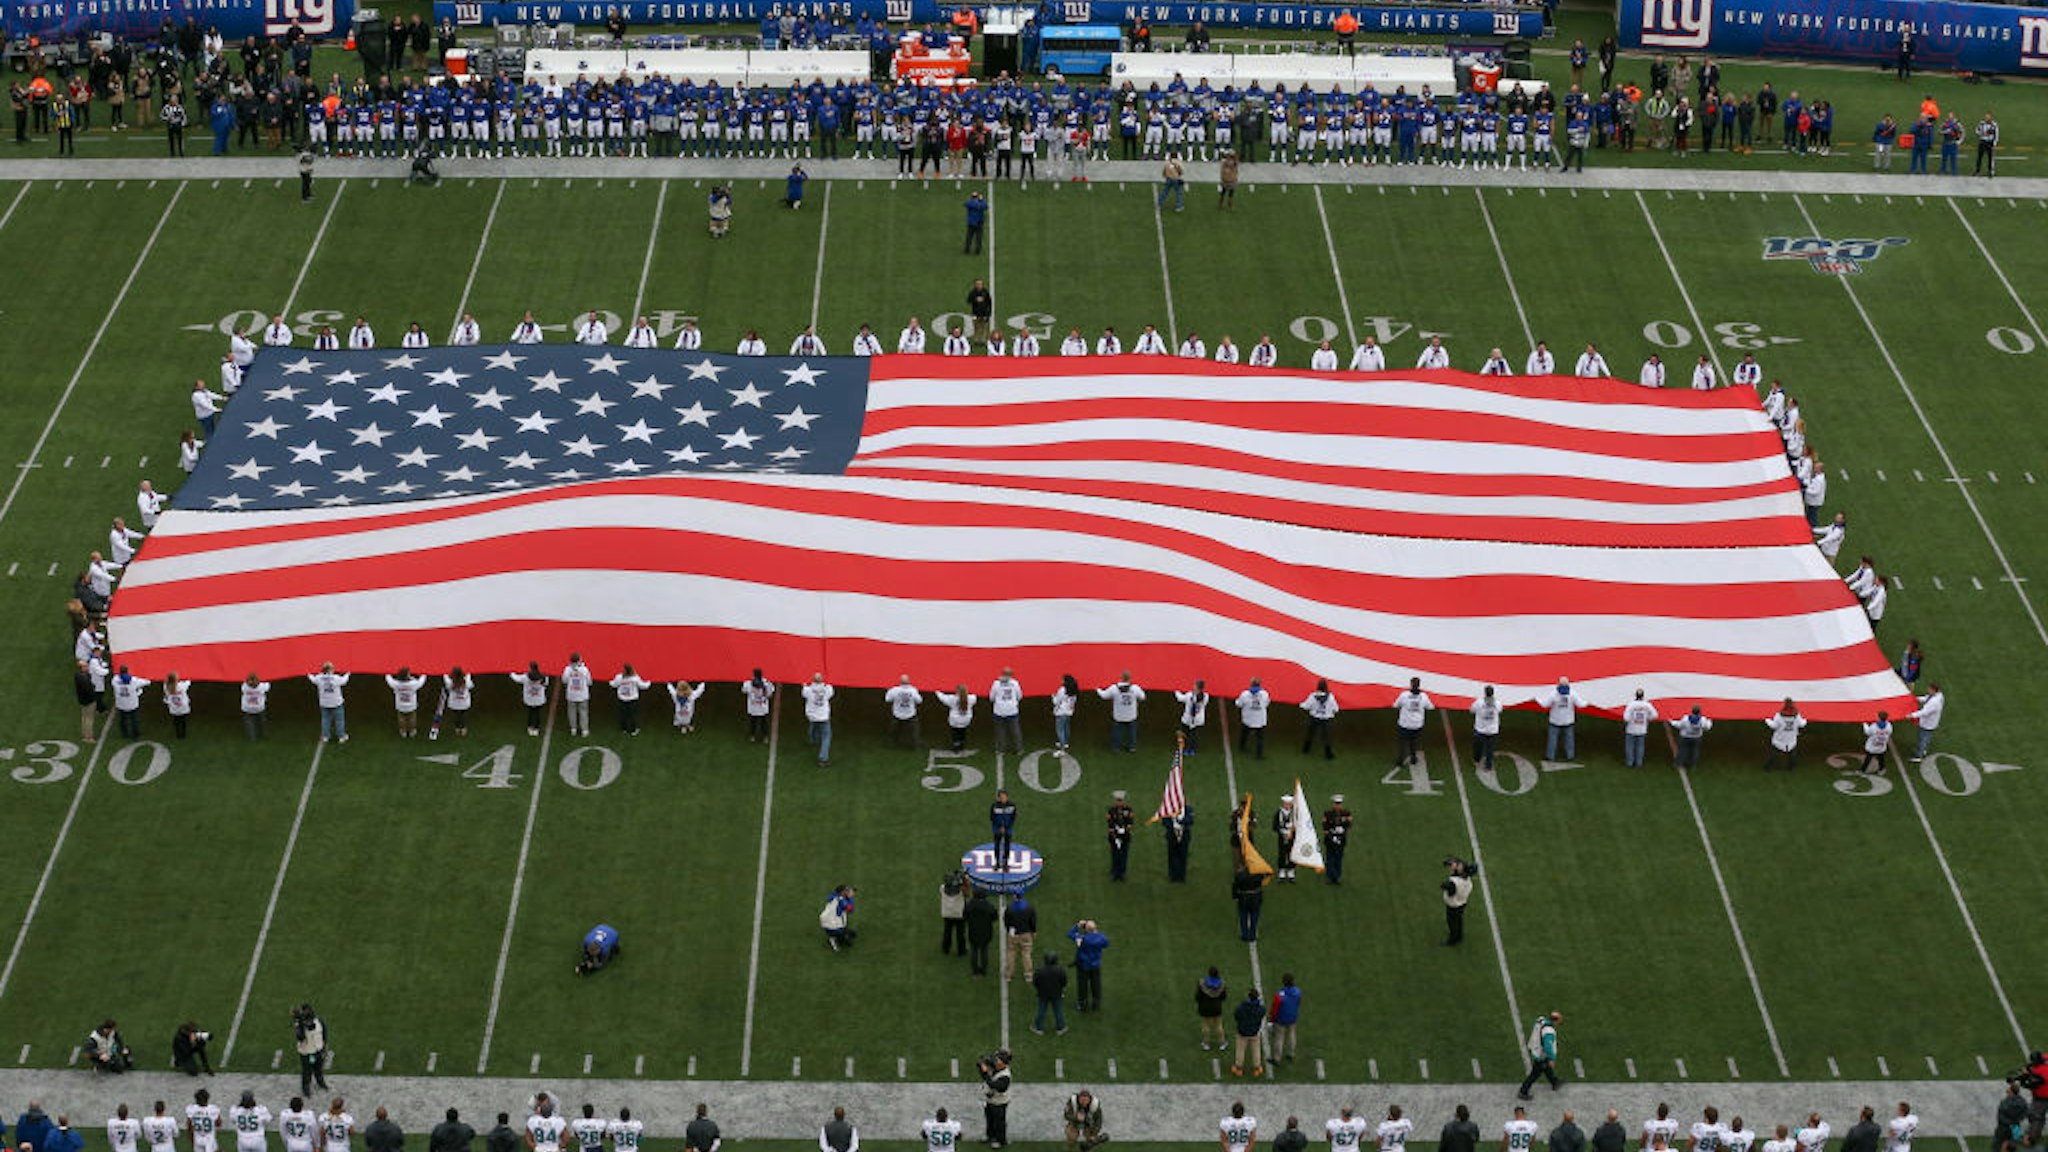 A general view of a large American Flag on the field prior to the National Football League game between the New York Giants and the Miami Dolphins on December 15, 2019 at MetLife Stadium in East Rutherford, NJ.